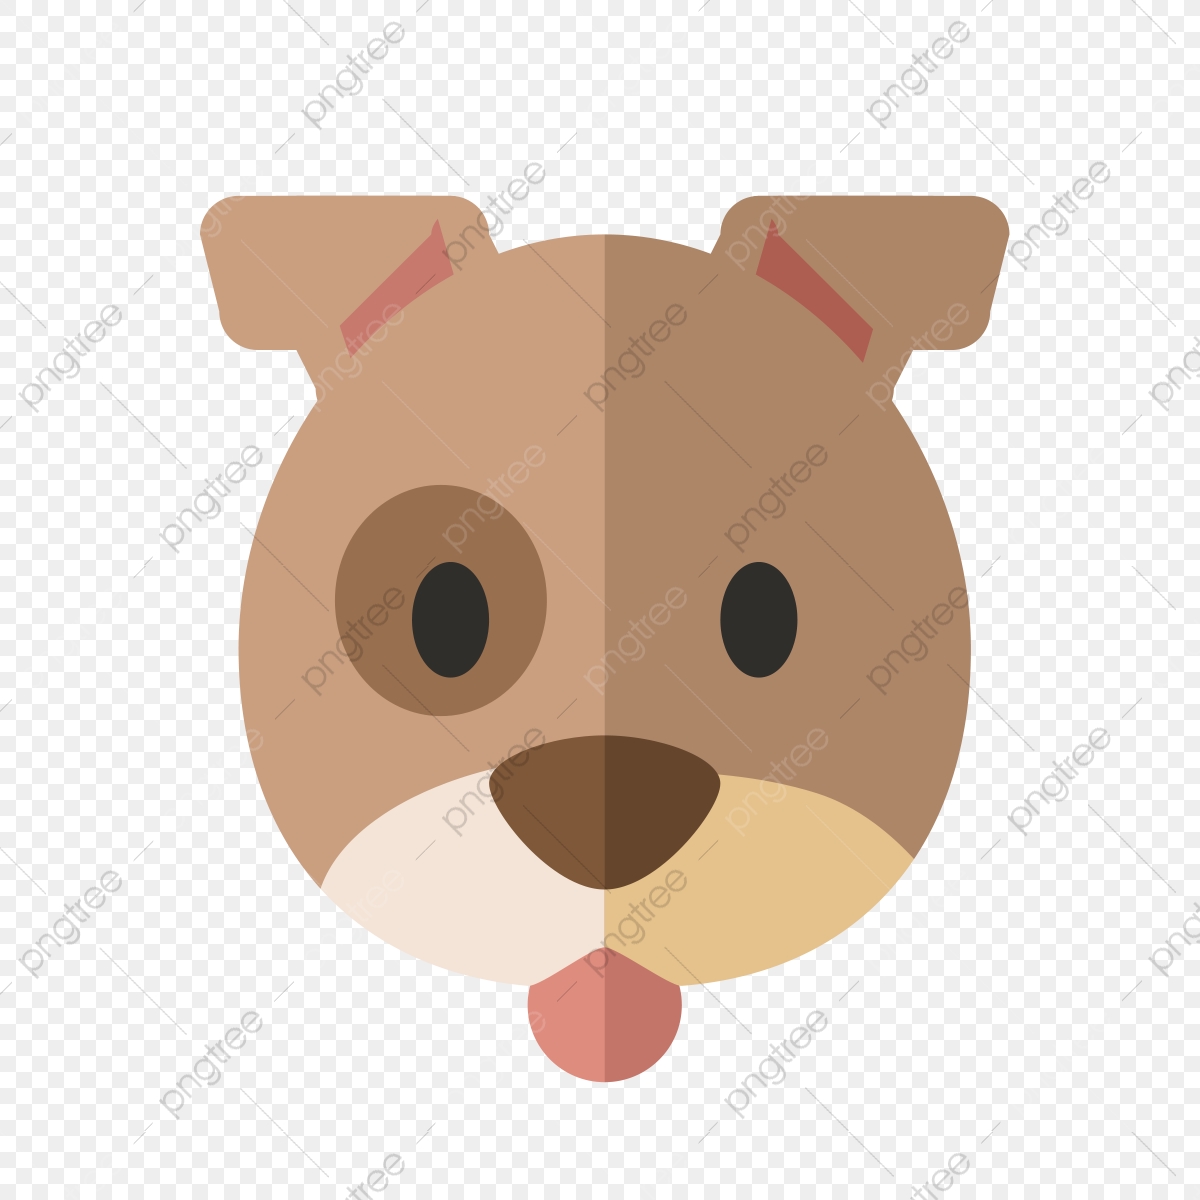 dogs clipart icon